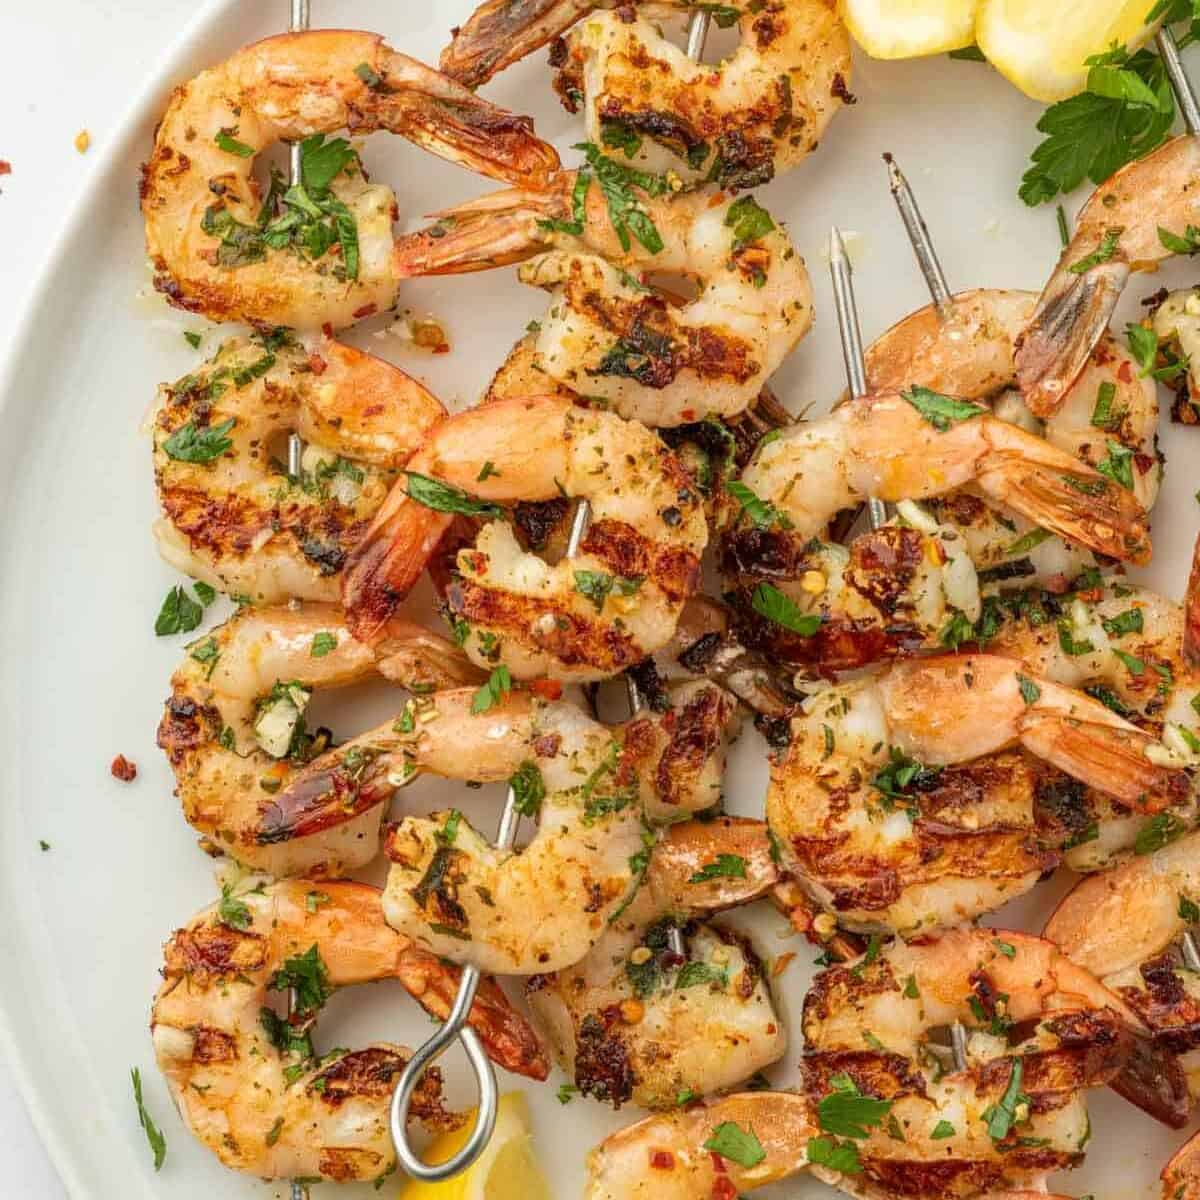 Shrimp kabobs with garlic on a white platter with lemon wedges.